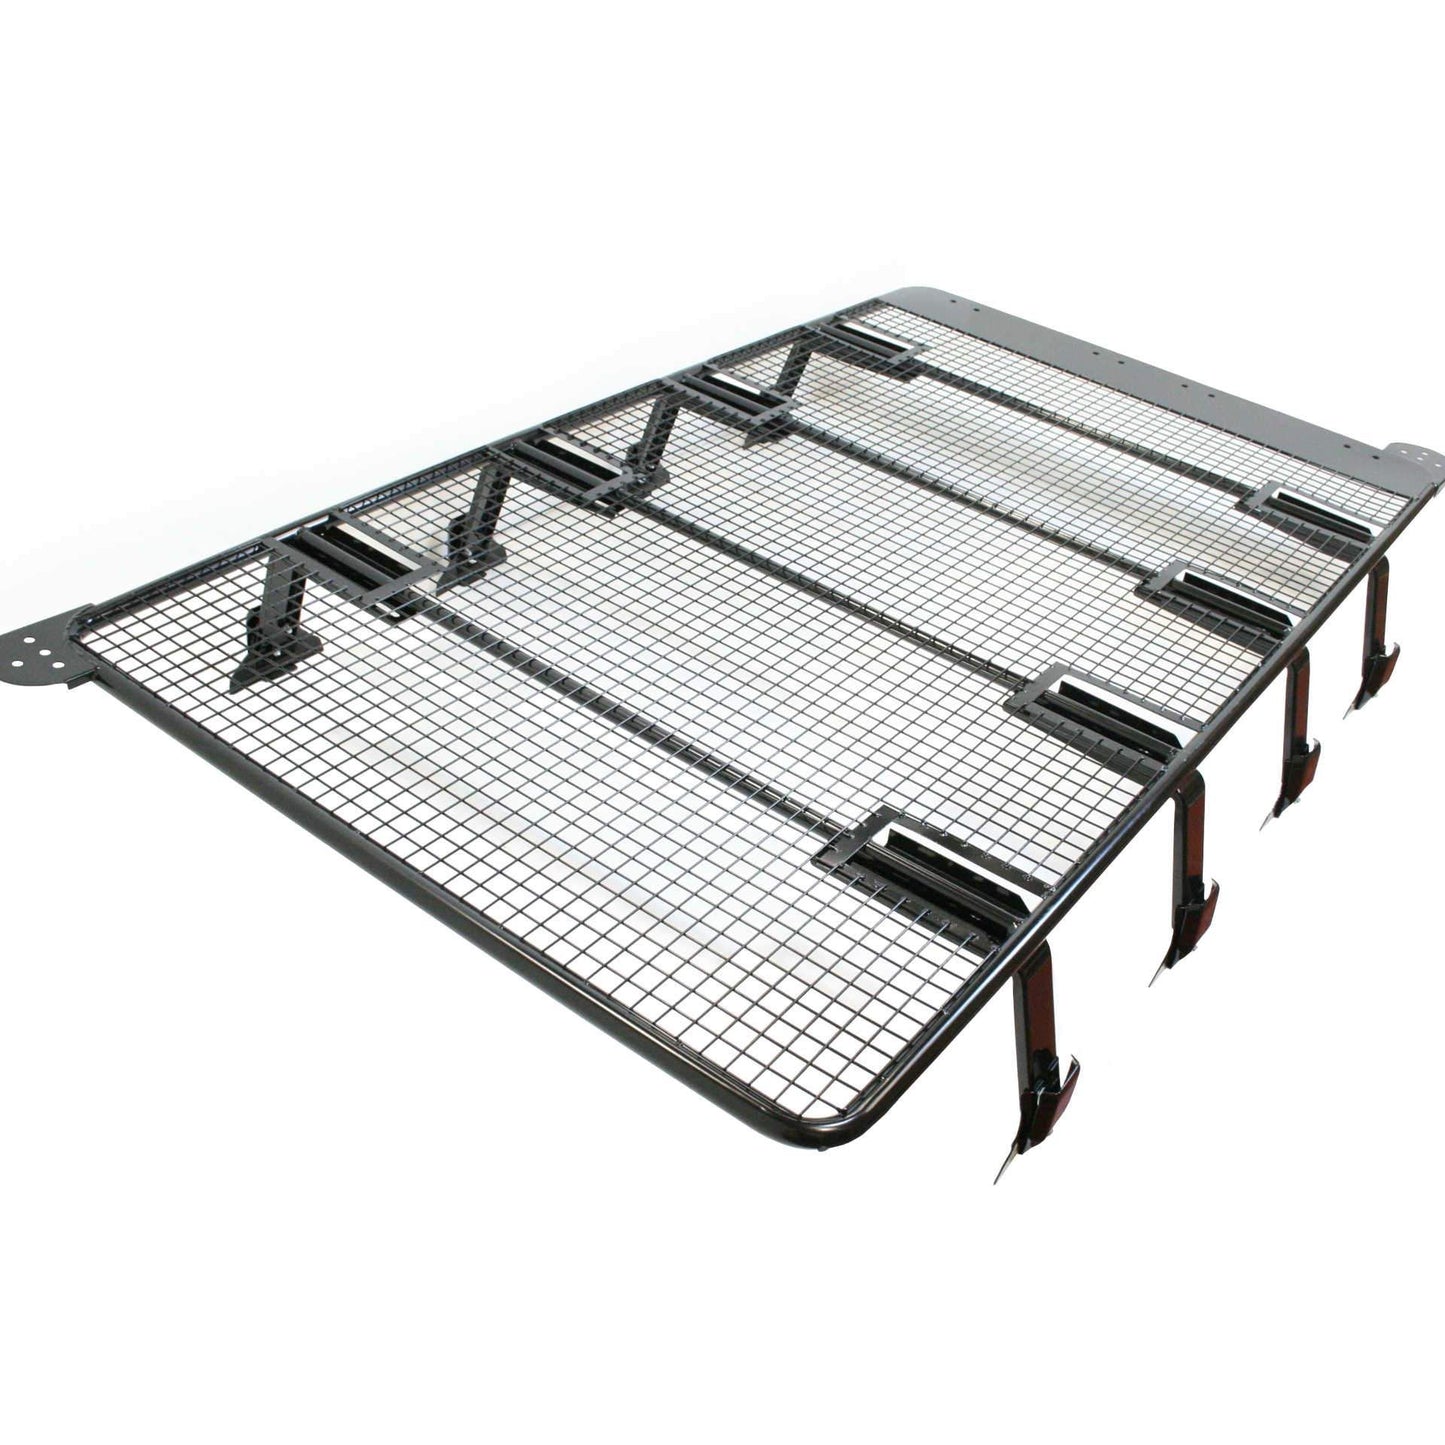 Expedition Steel Flat Roof Rack for Toyota Land Cruiser Amazon 1992-1997